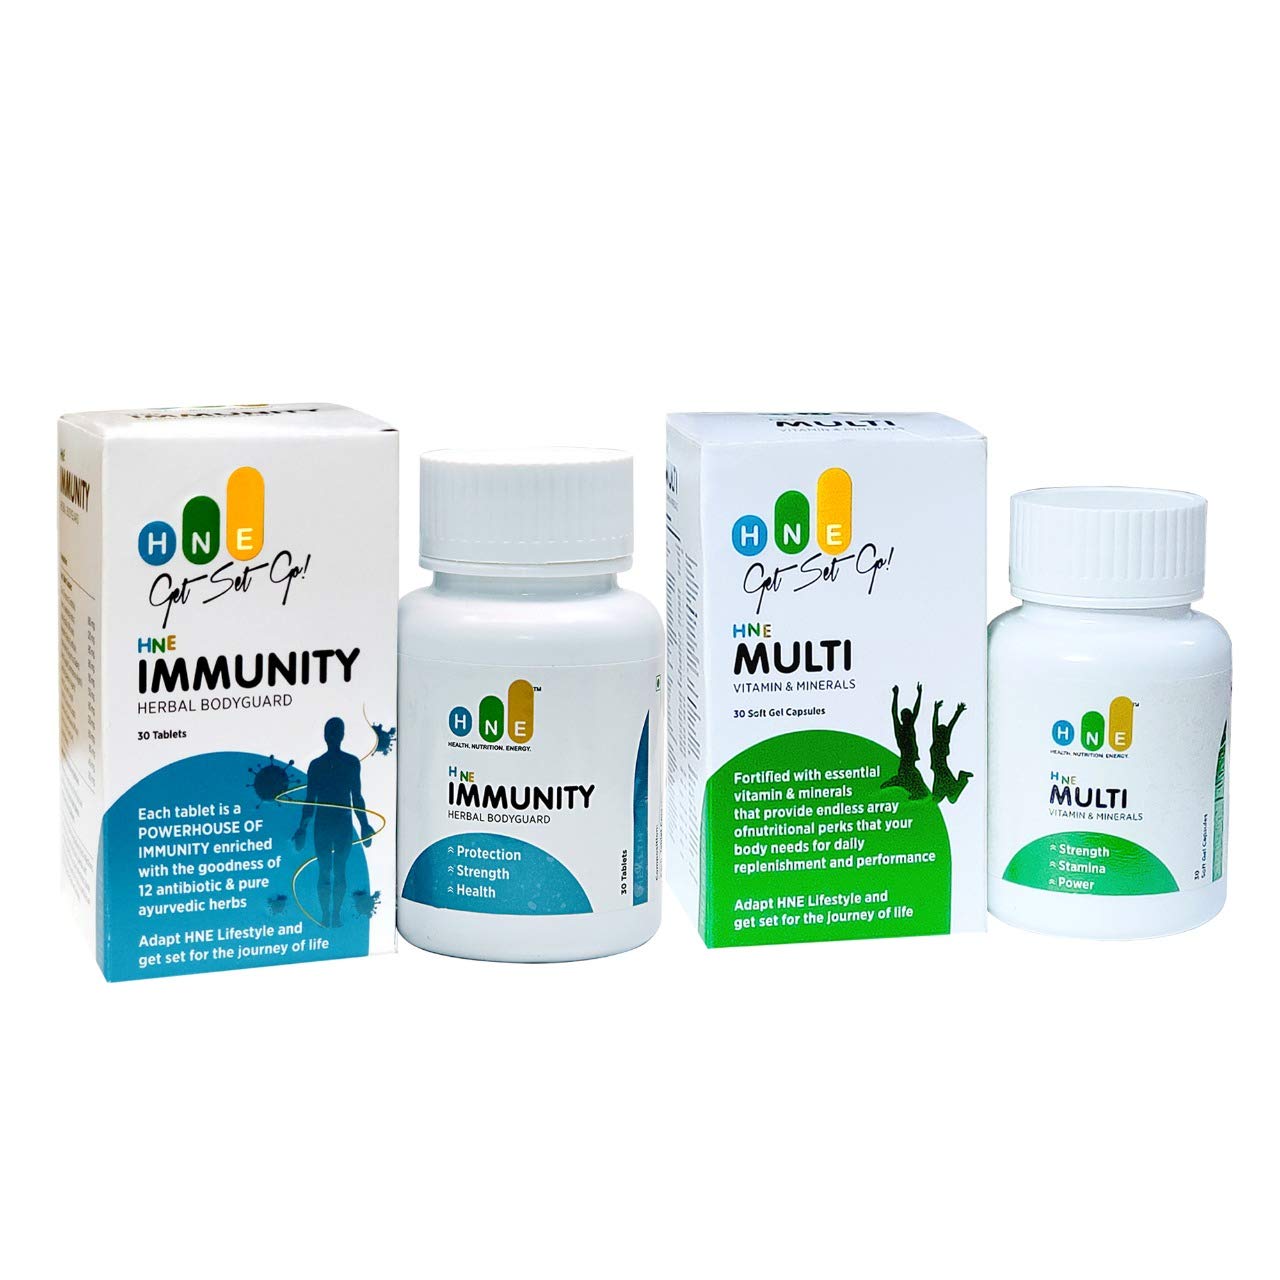 Product Name: HNE Immunity, Compositions of HNE Immunity are Herbal Bodyguard - HNE Healthcare